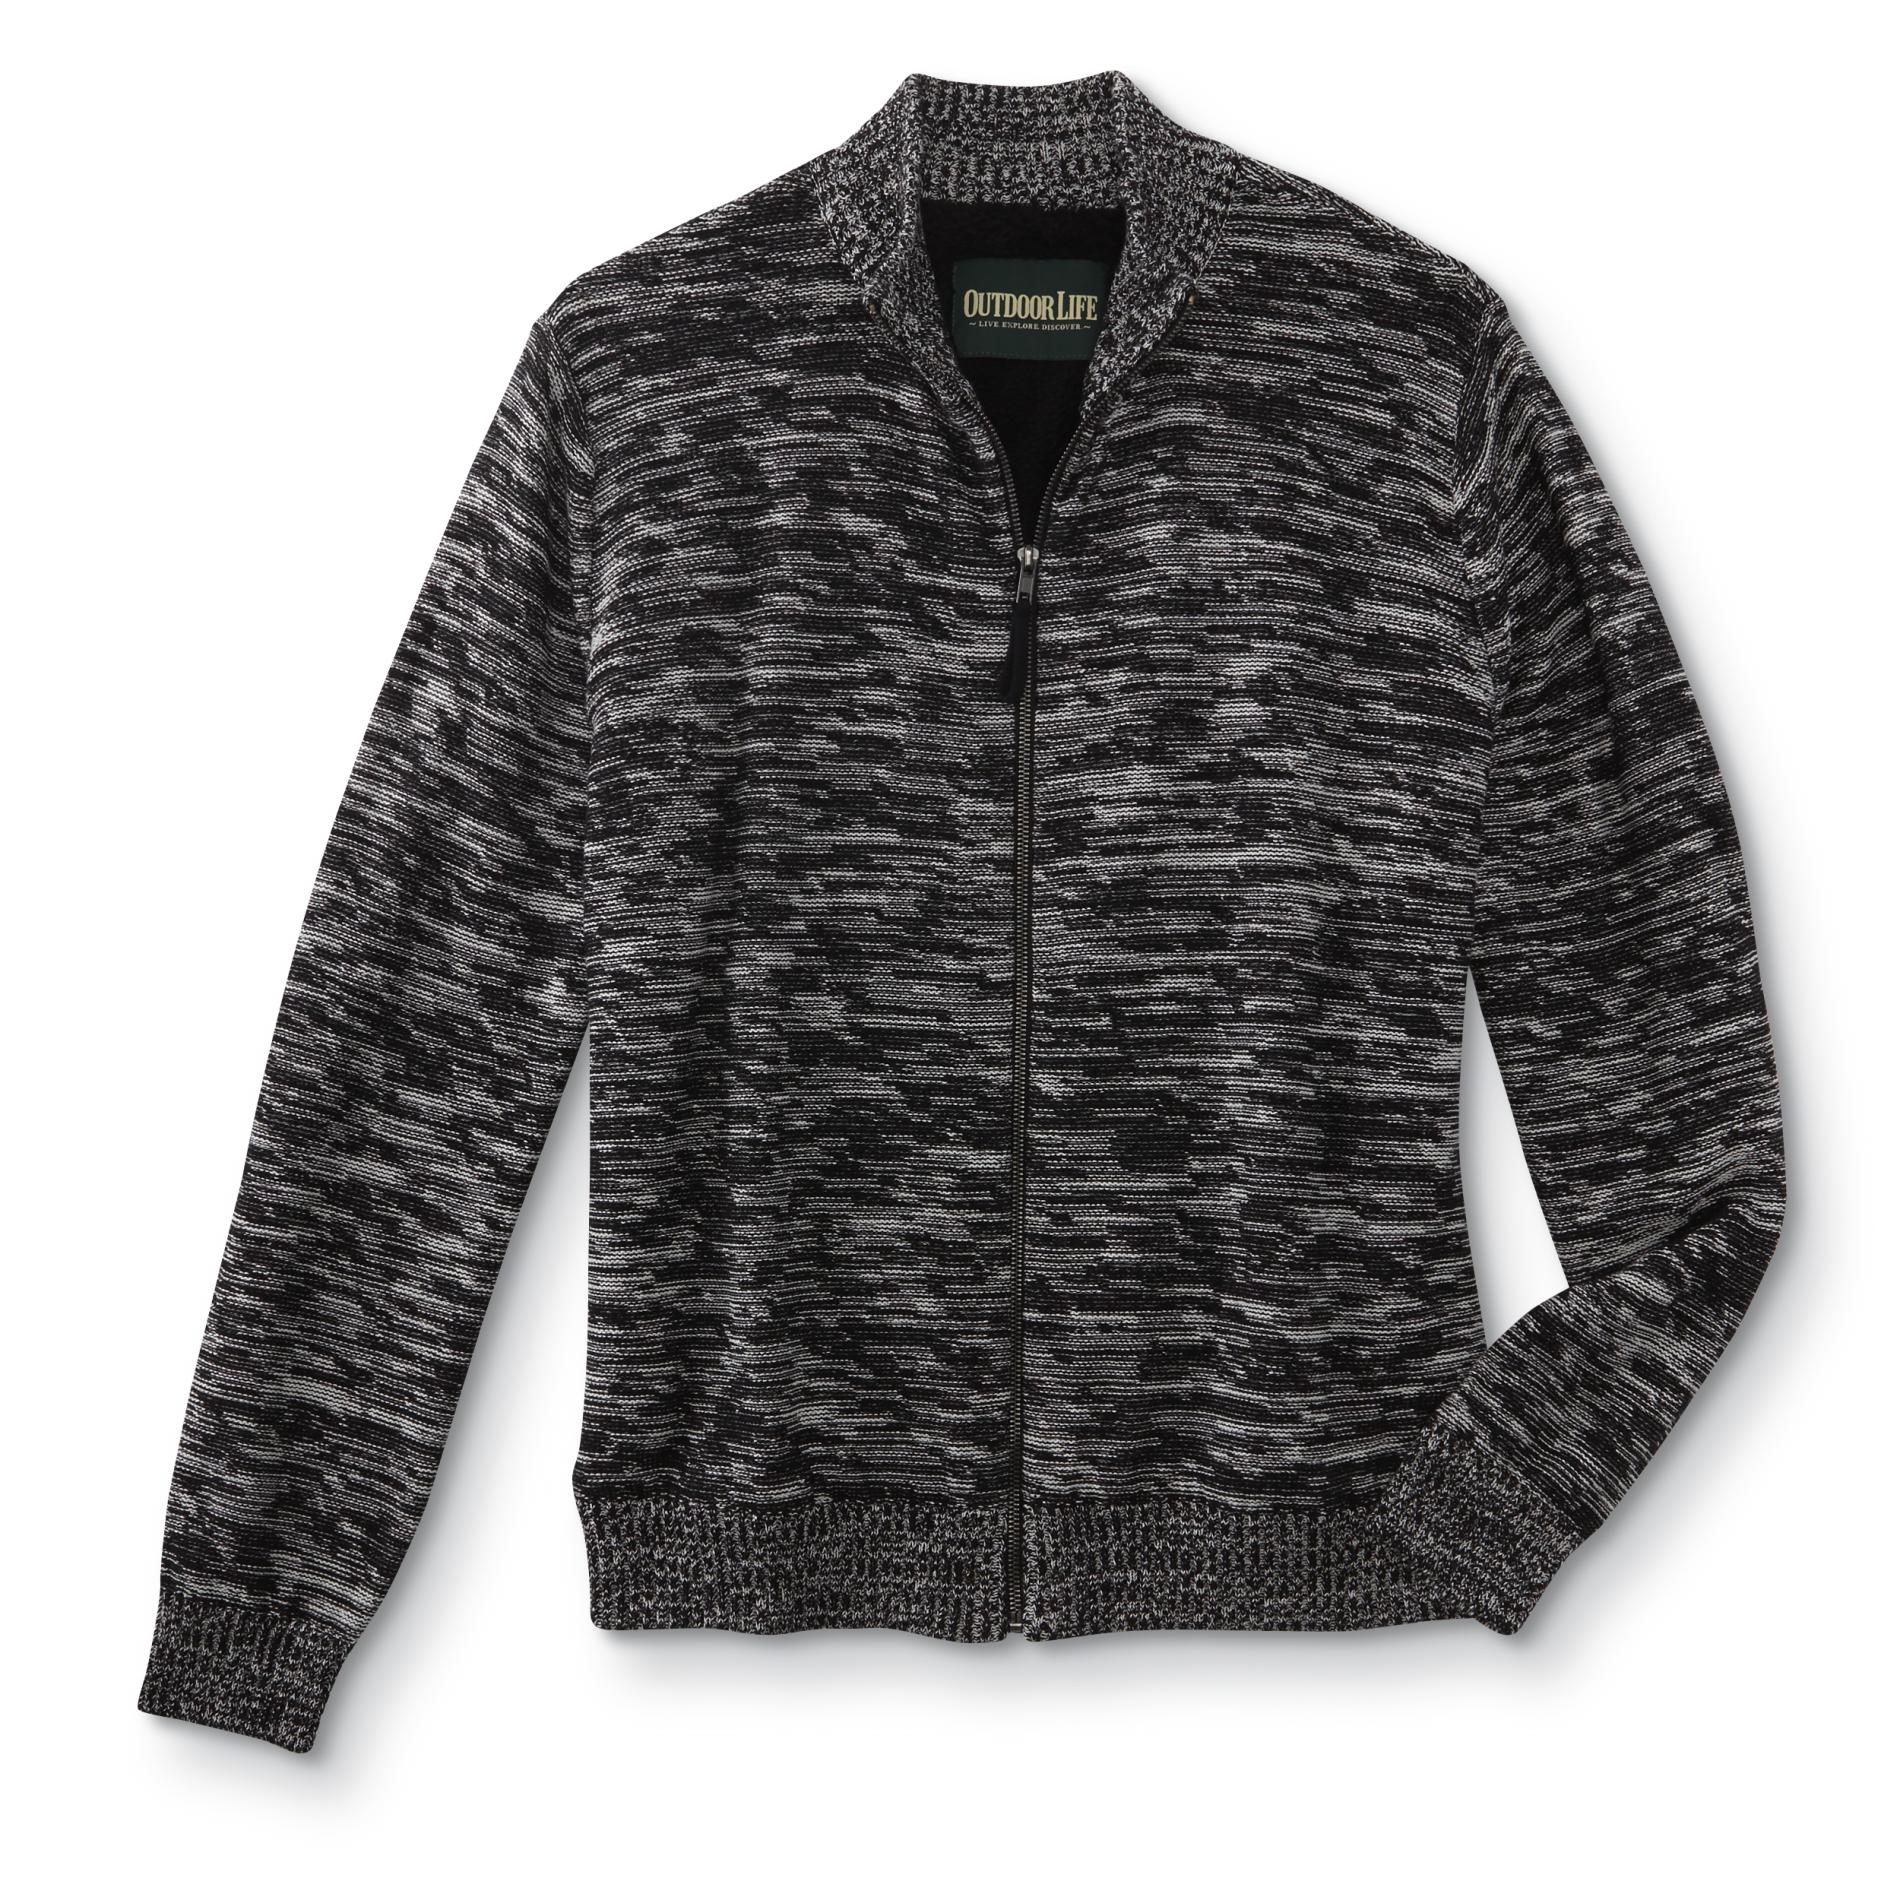 Men's Sweater Jacket - Marled | Shop Your Way: Online Shopping & Earn ...